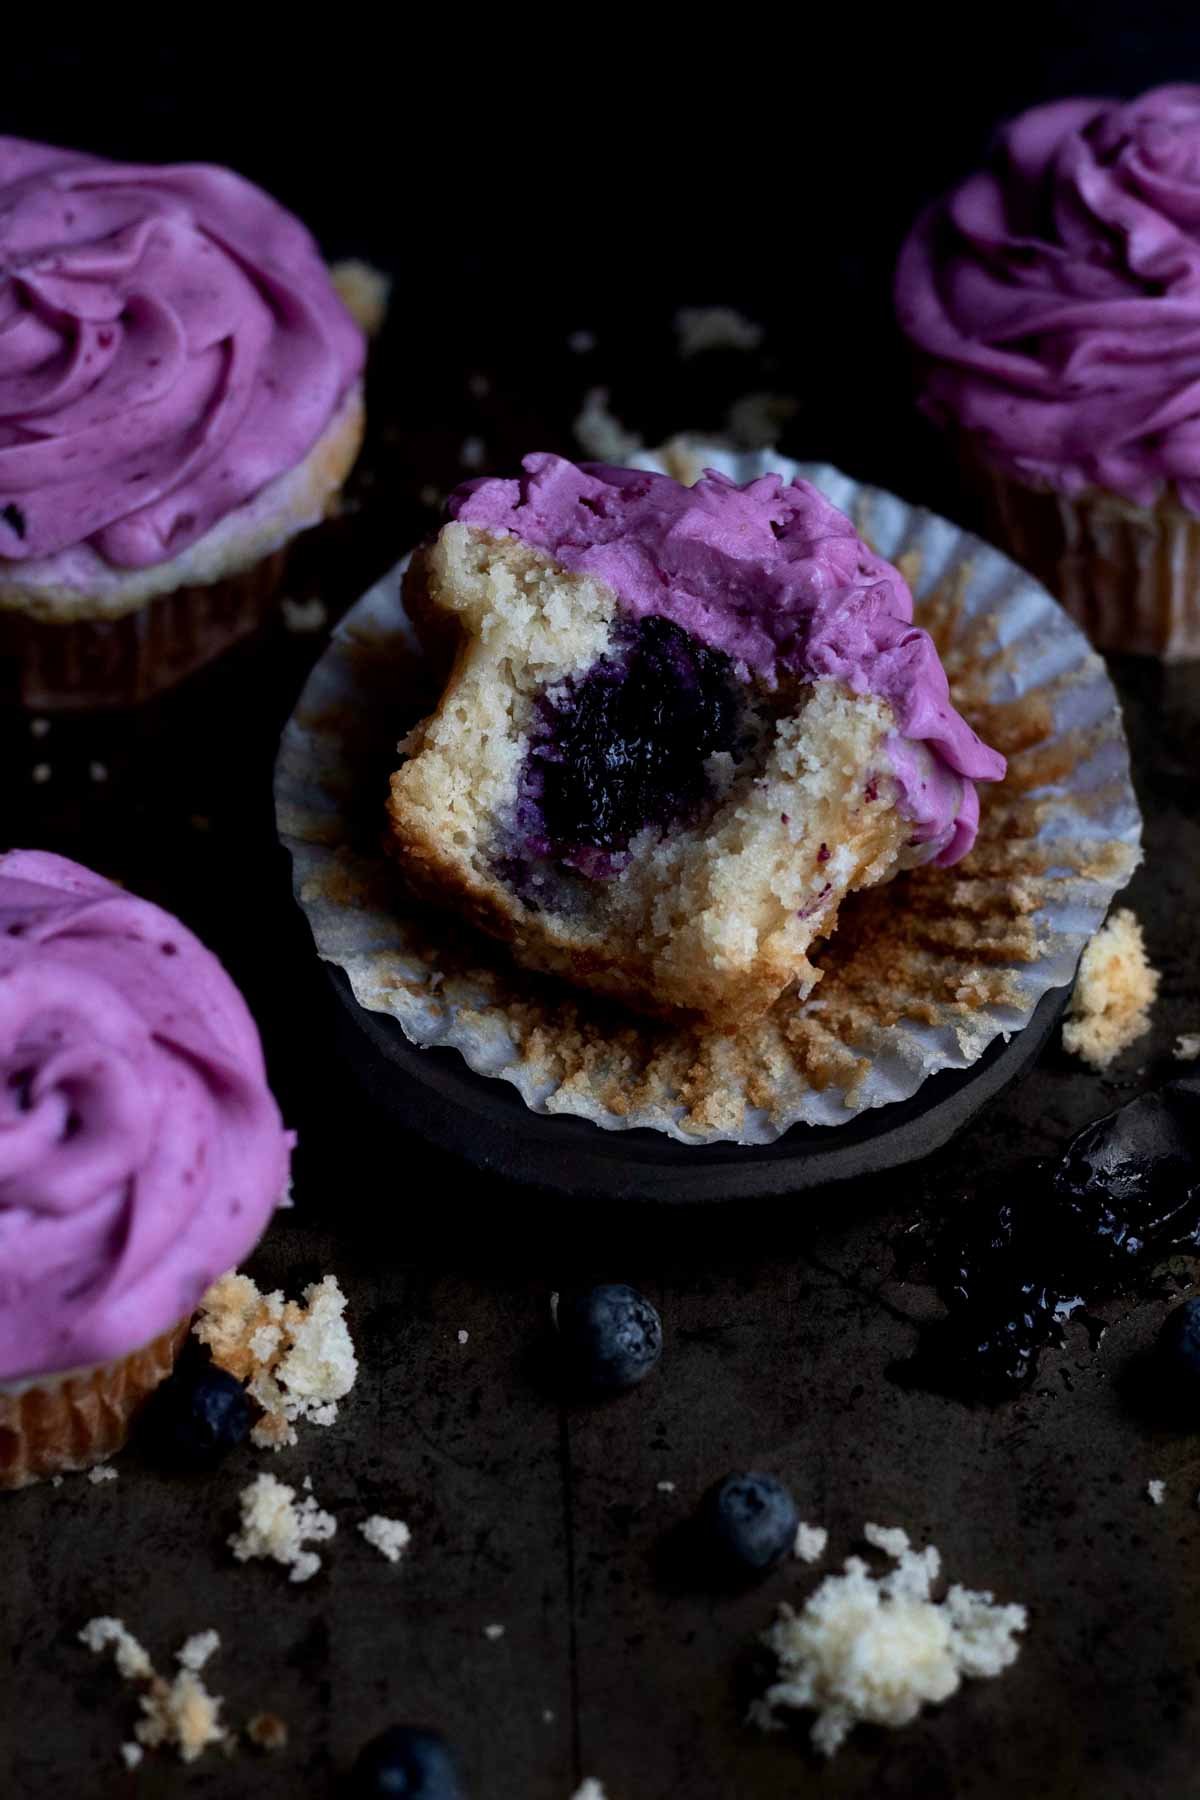 A bitten Blueberry Cupcake with the deep purple blueberry jam exposed.